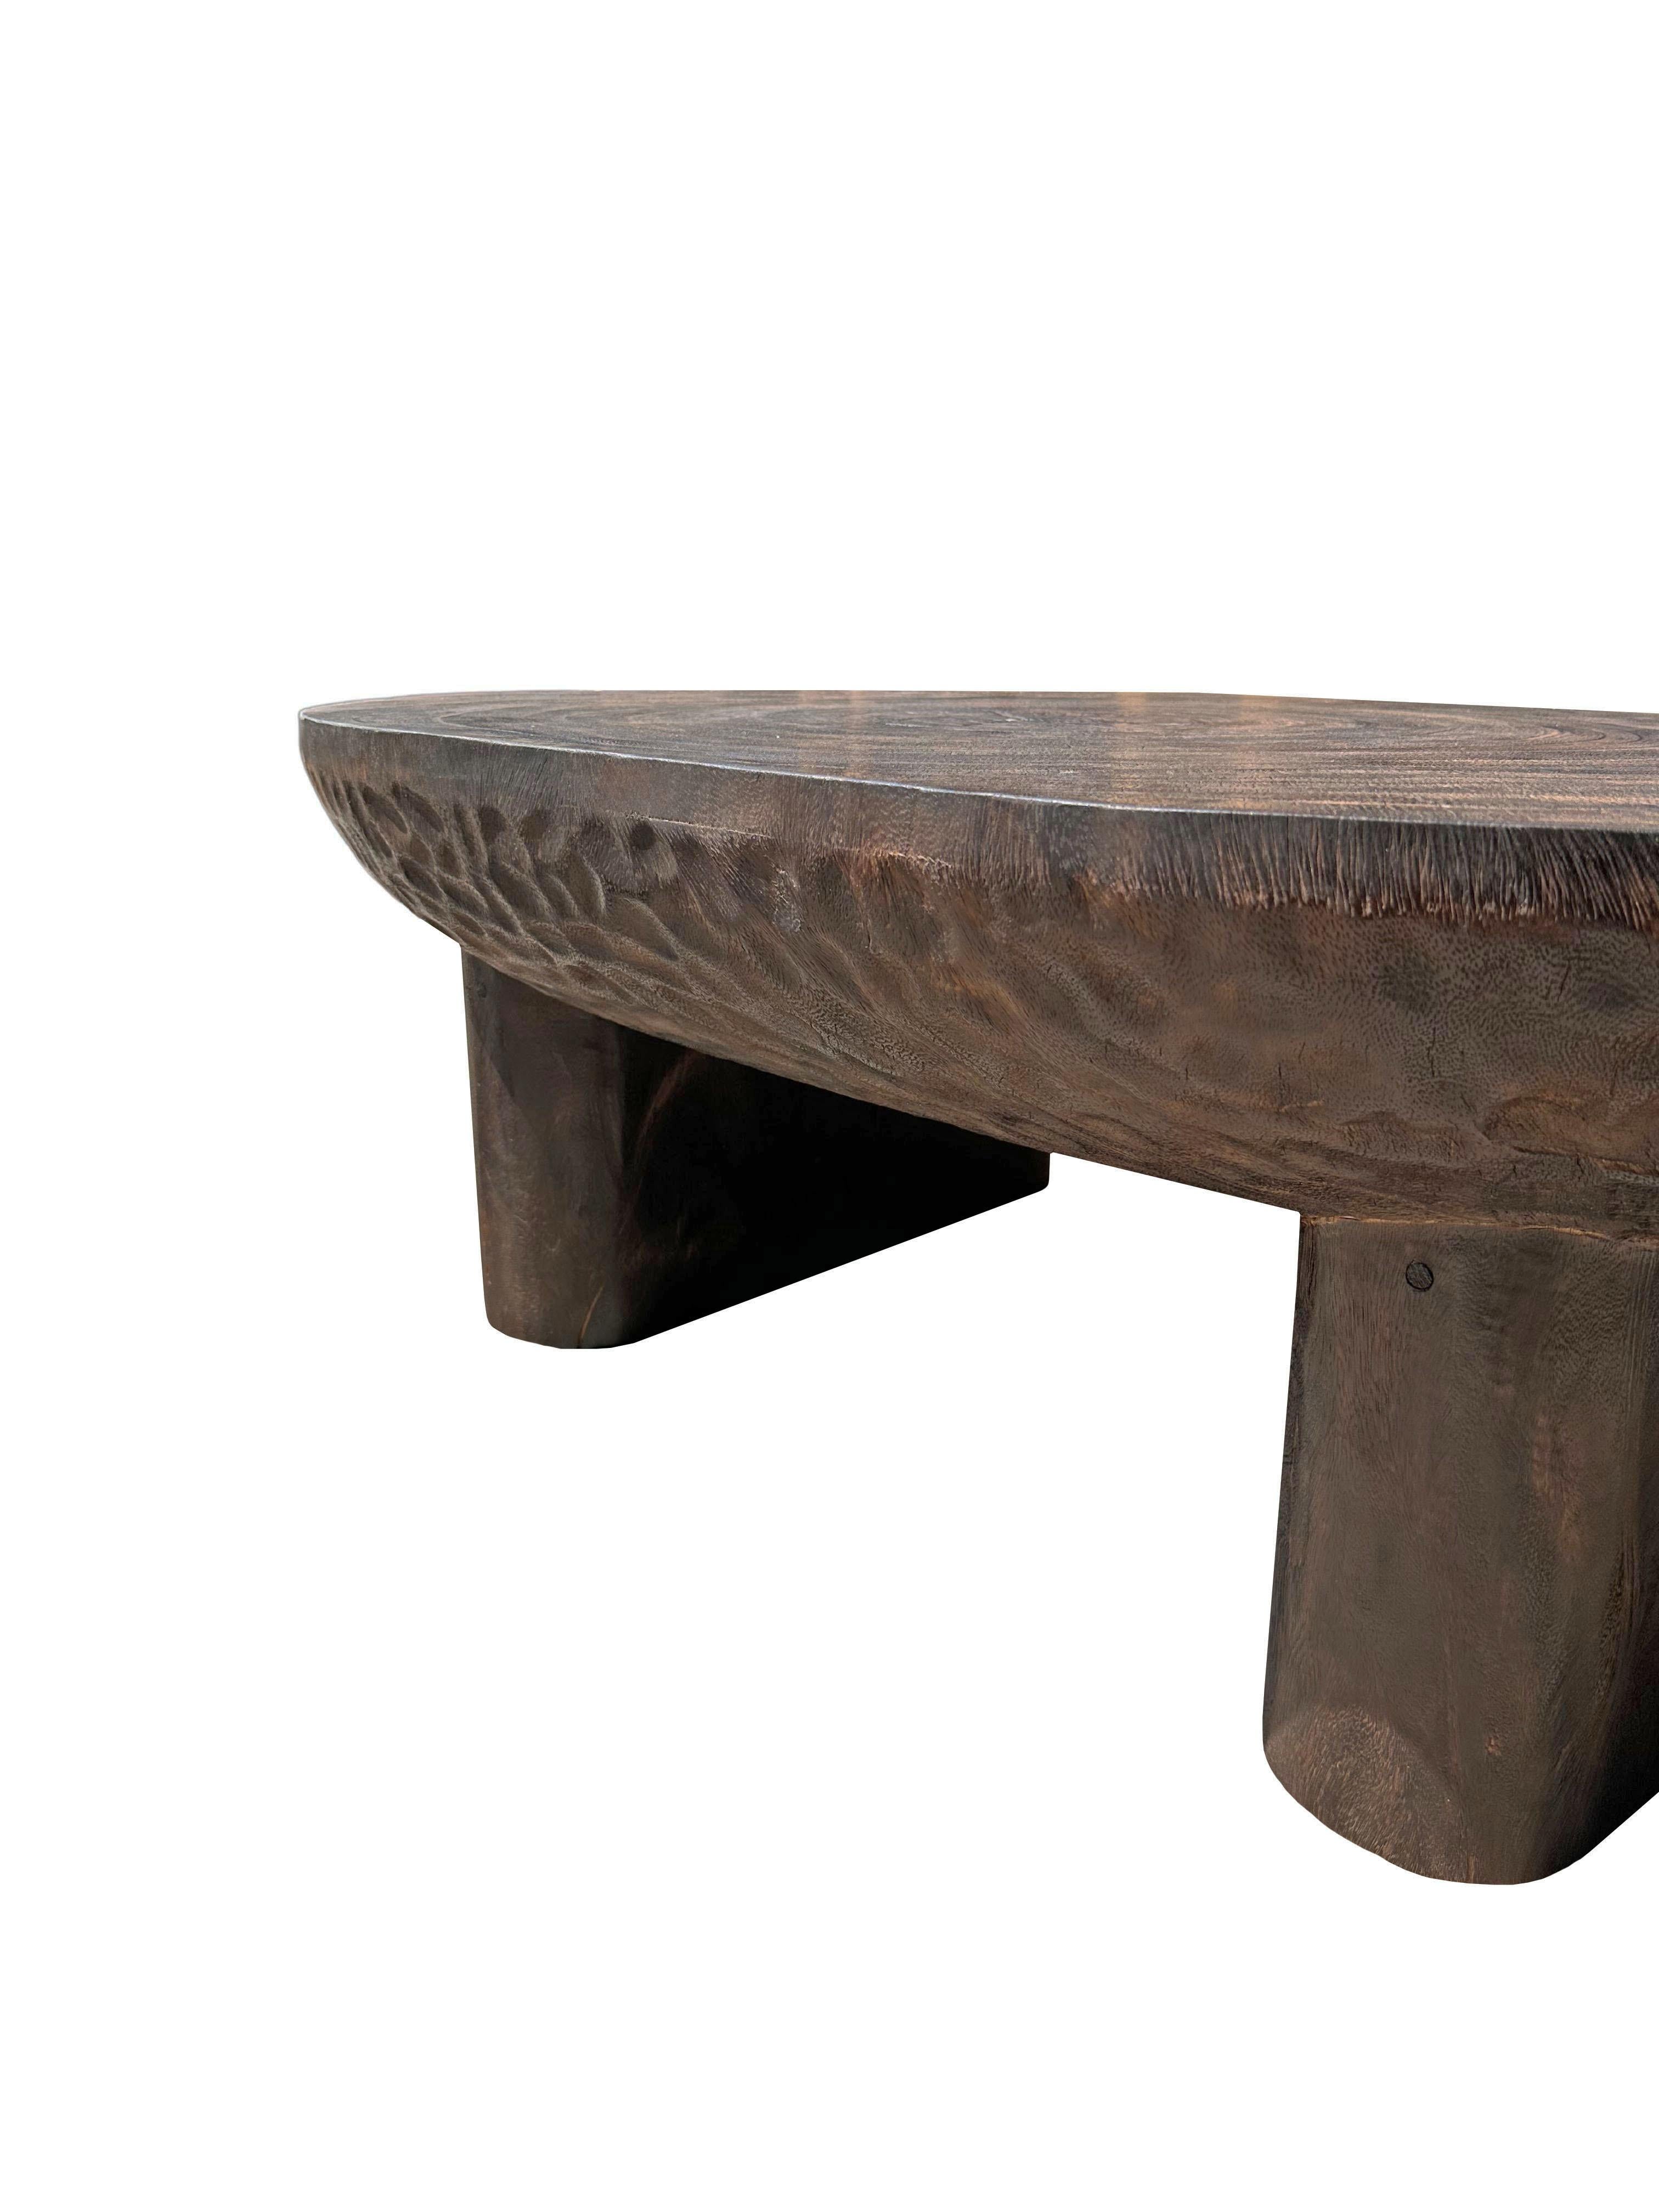 hewn table